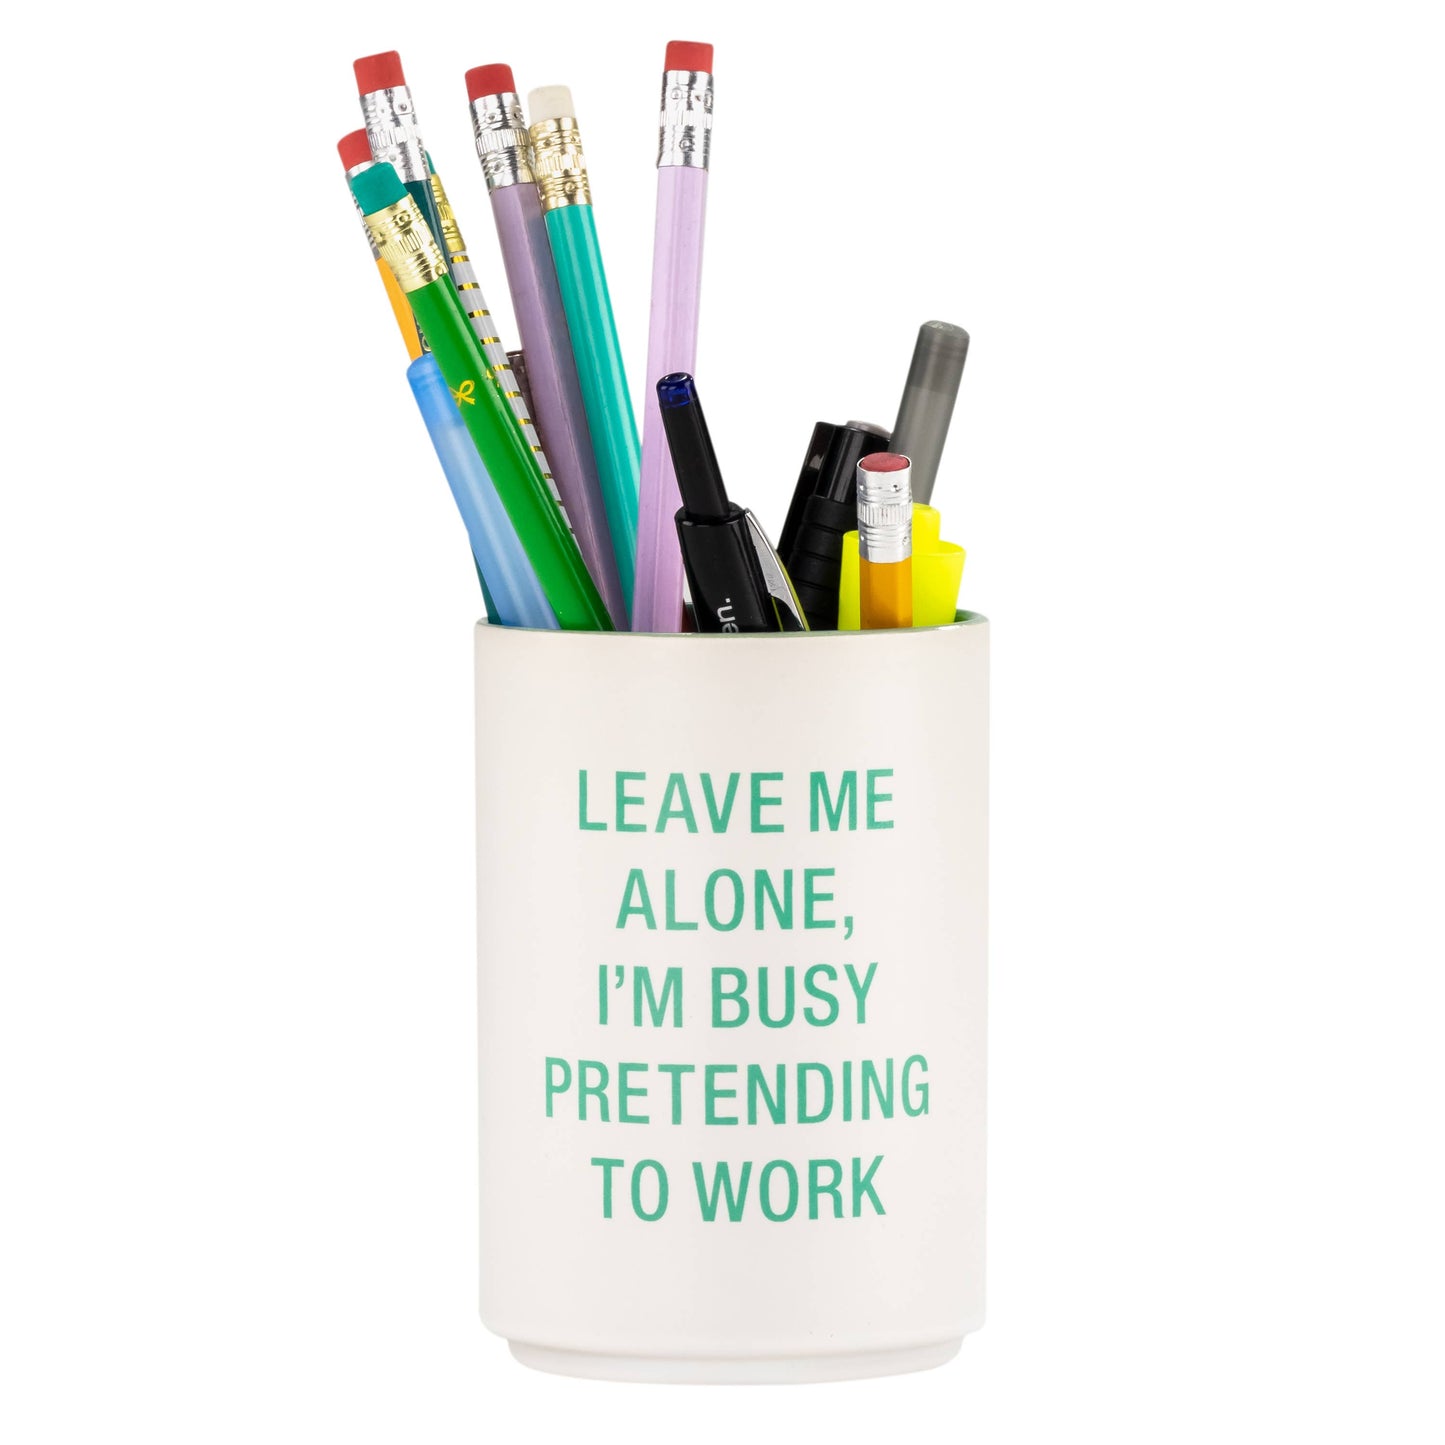 Leave Me Alone I'm Busy Pretending To Work -  Pencil Cup